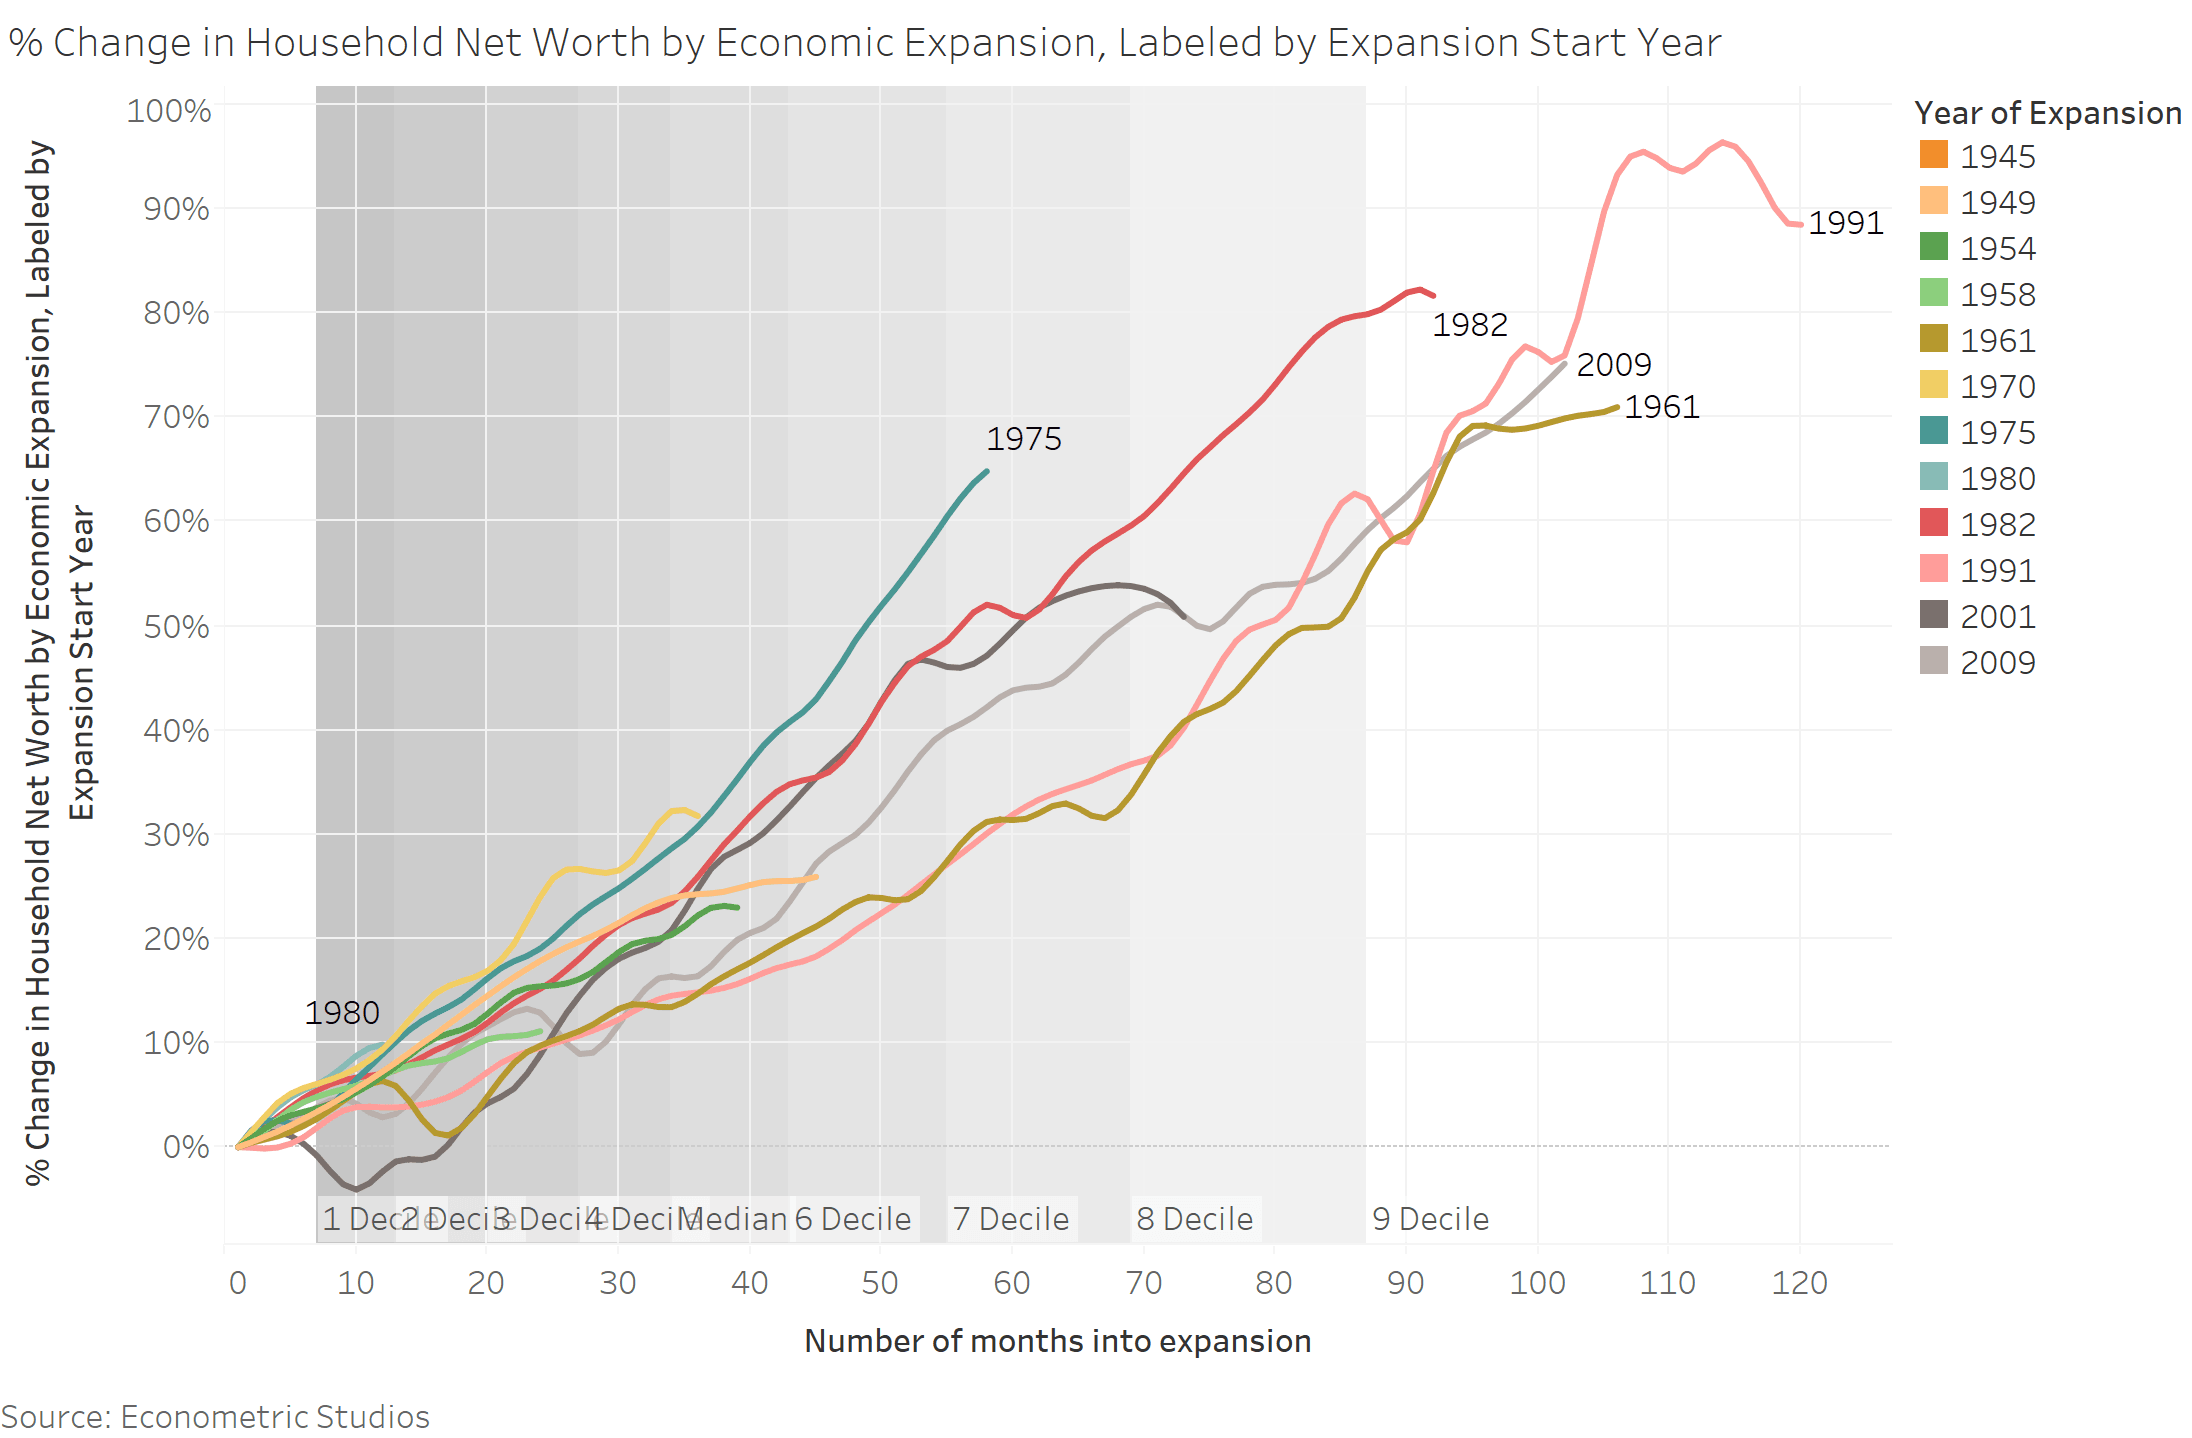 Change in Household Net Worth by Economic Expansion Labeled by Expansion Start Year